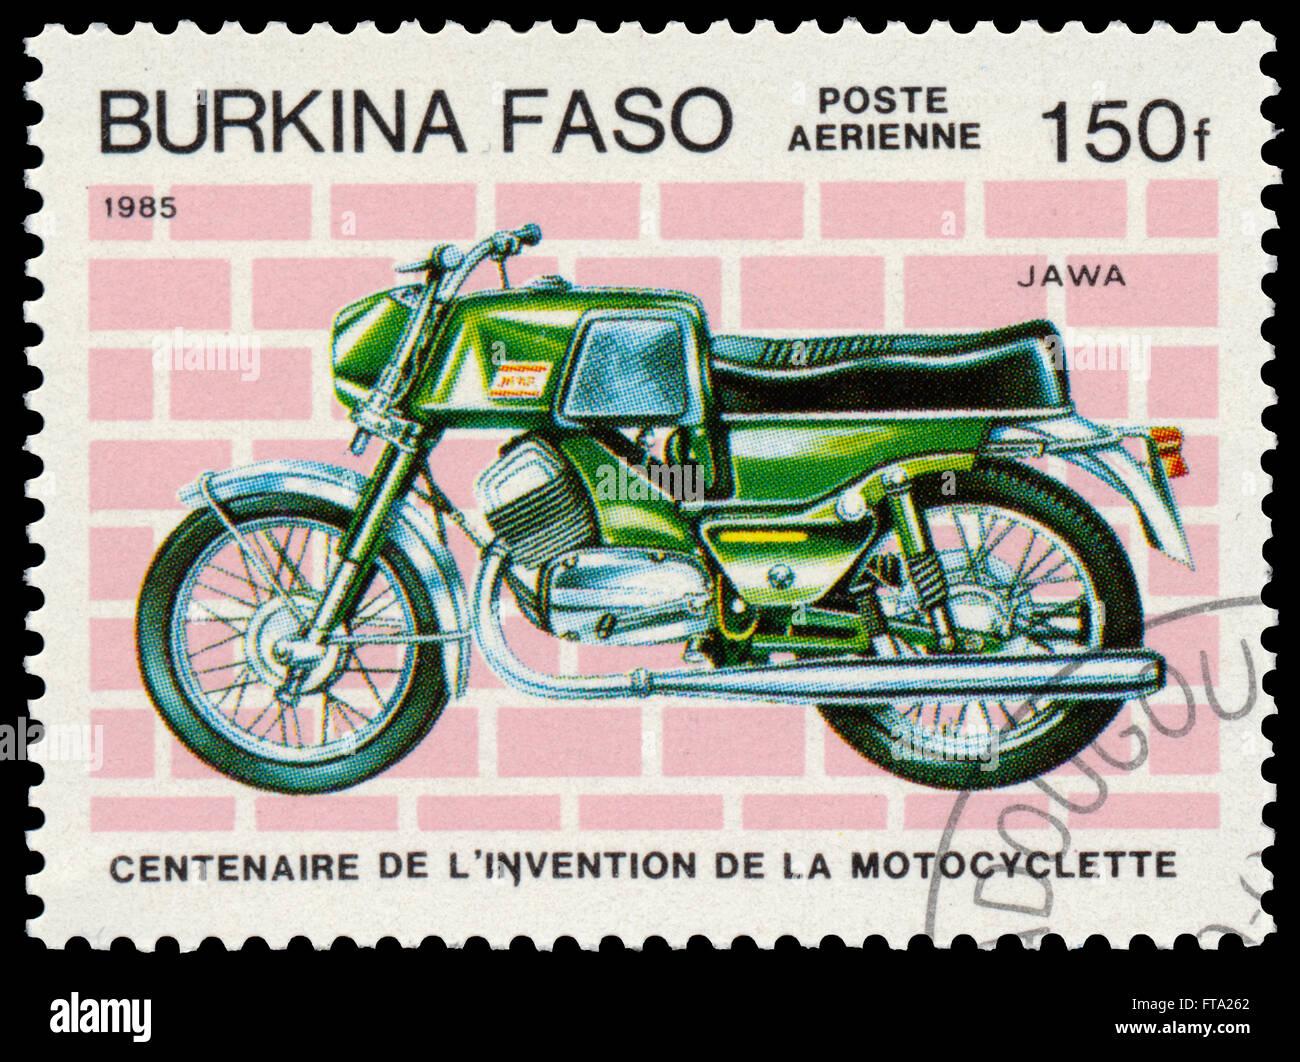 BUDAPEST, HUNGARY - 18 march 2016:  a stamp printed in Burkina Faso shows image of a vintage motorcycle, Jawa, circa 1985 Stock Photo